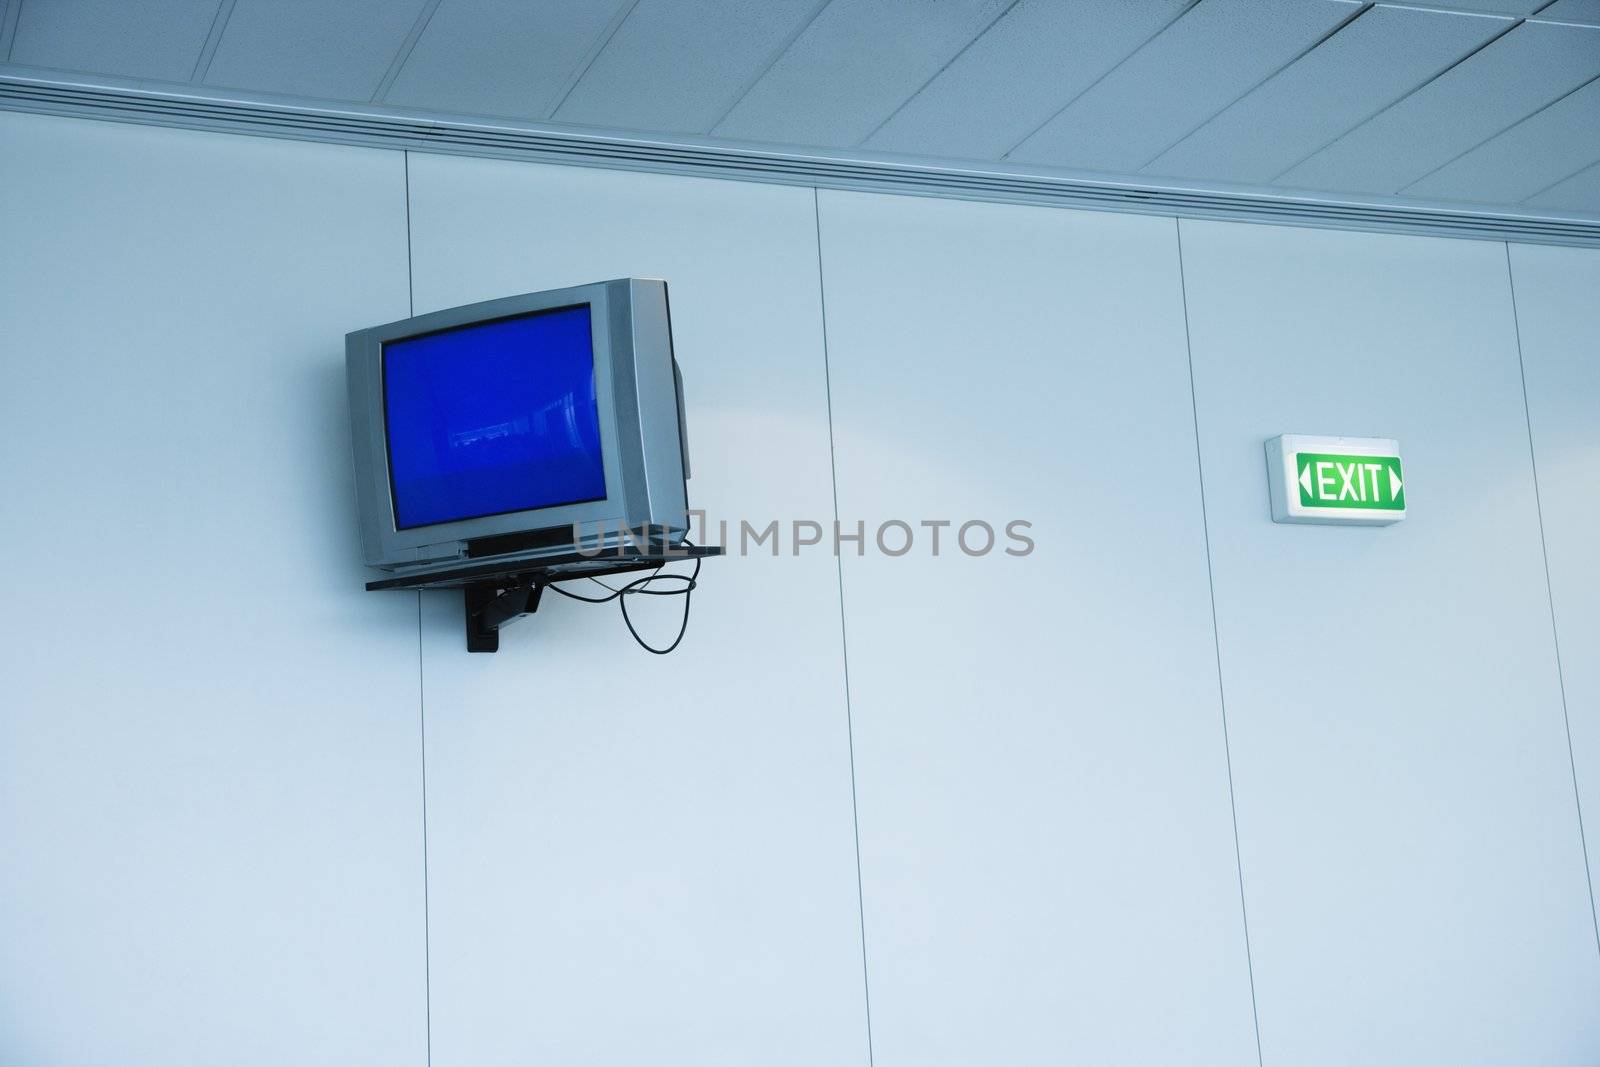 Monitor mounted to wall next to exit sign in airport